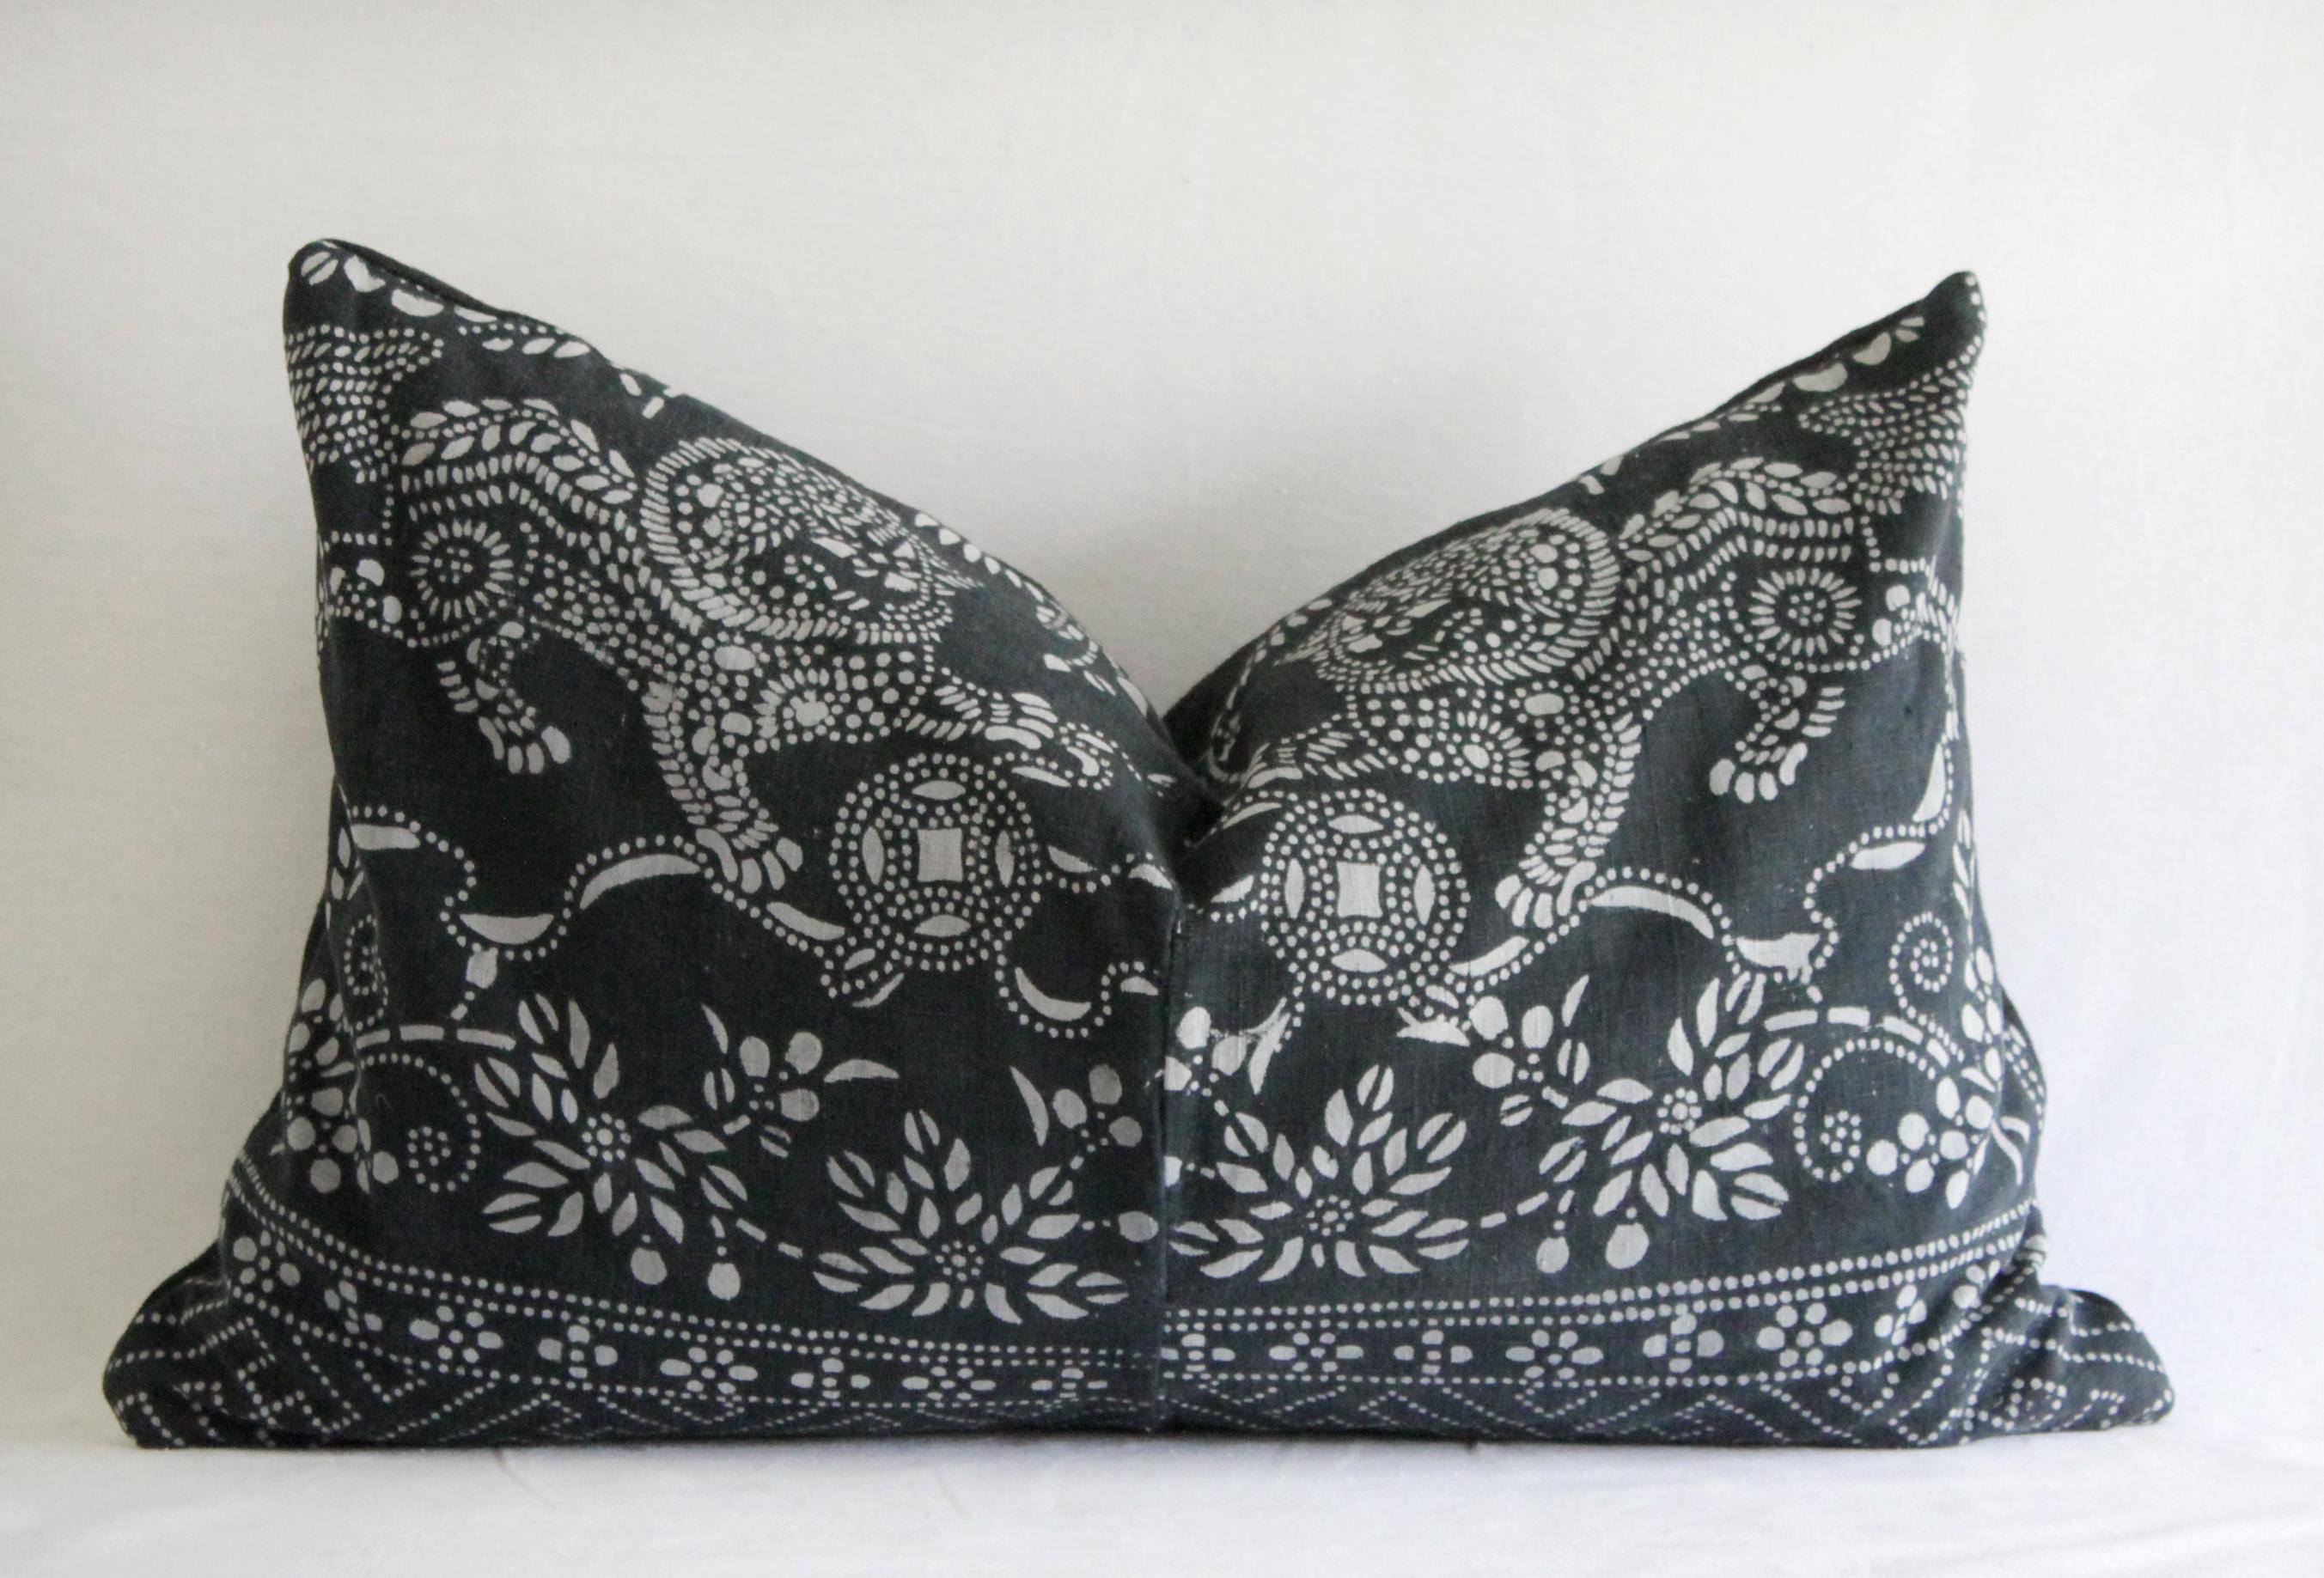 Pair of vintage Batik black lumbar pillows
A faded black background, with grayish white patterns. Hidden zipper closure, and solid black linen background. 
Measures: 14